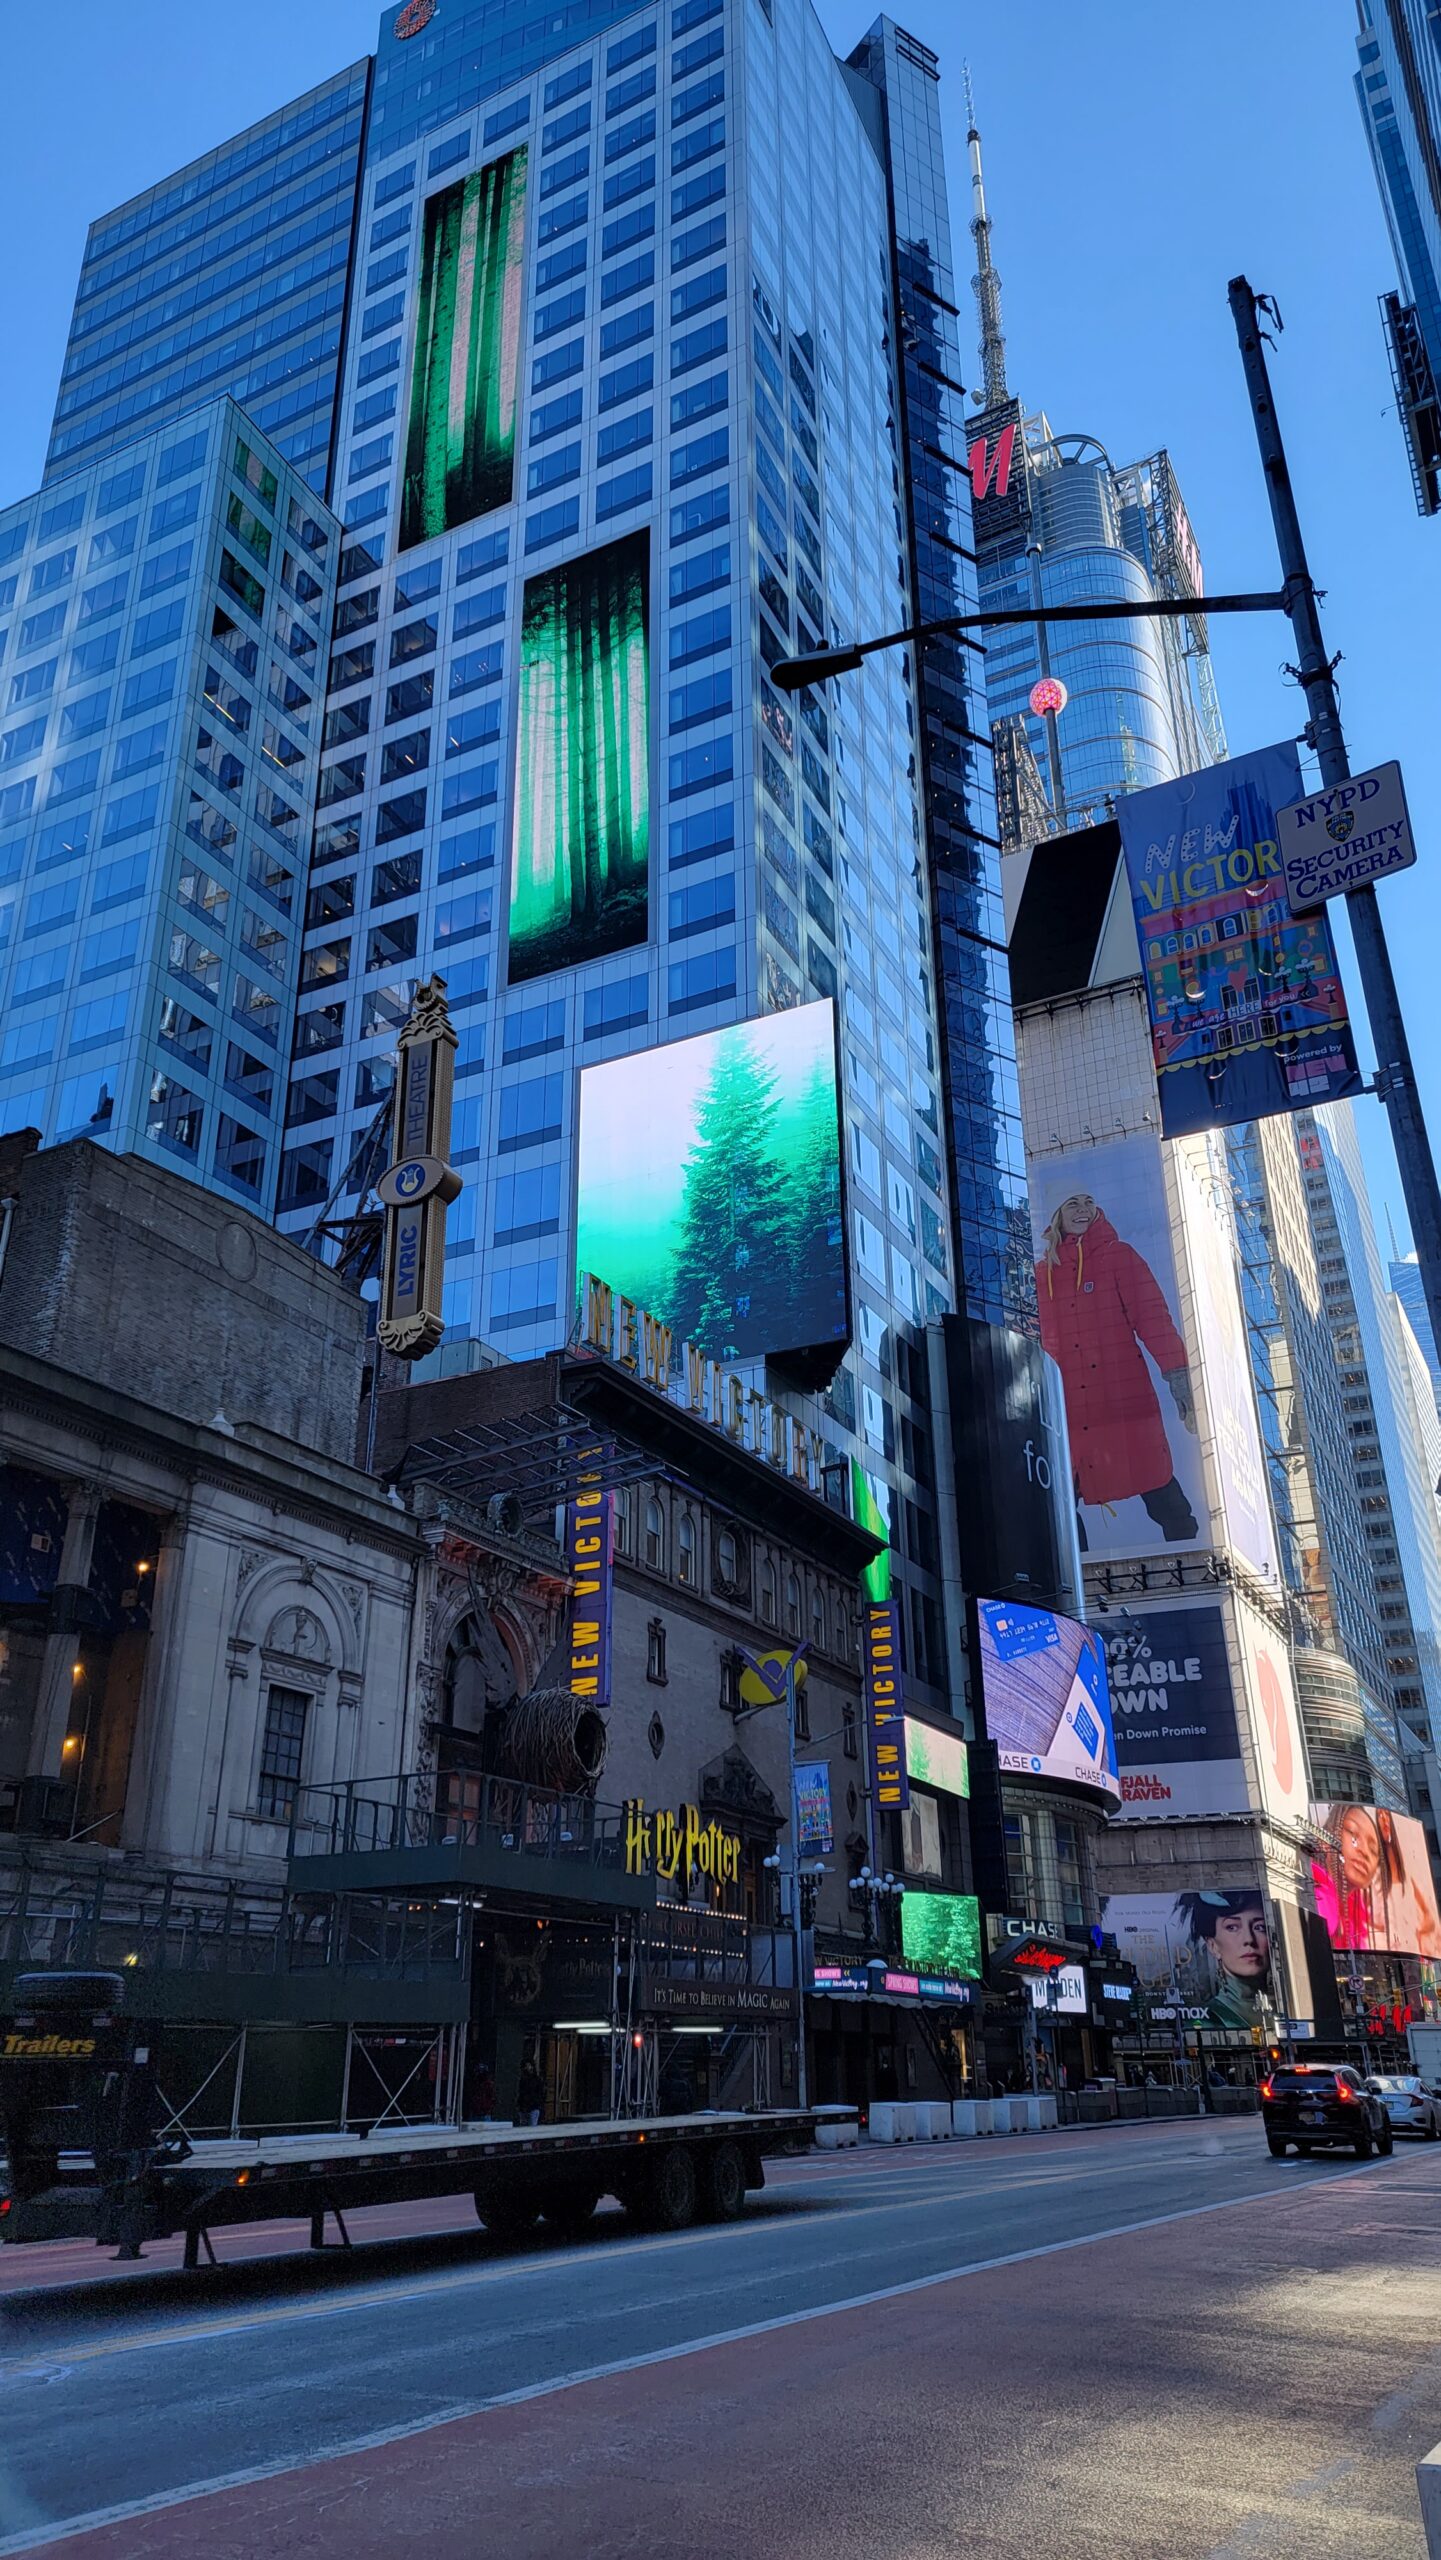 Connected Studios, from iconic Times Square billboard placements to Television advertising, we provide companies large and small with unparalleled digital media opportunities